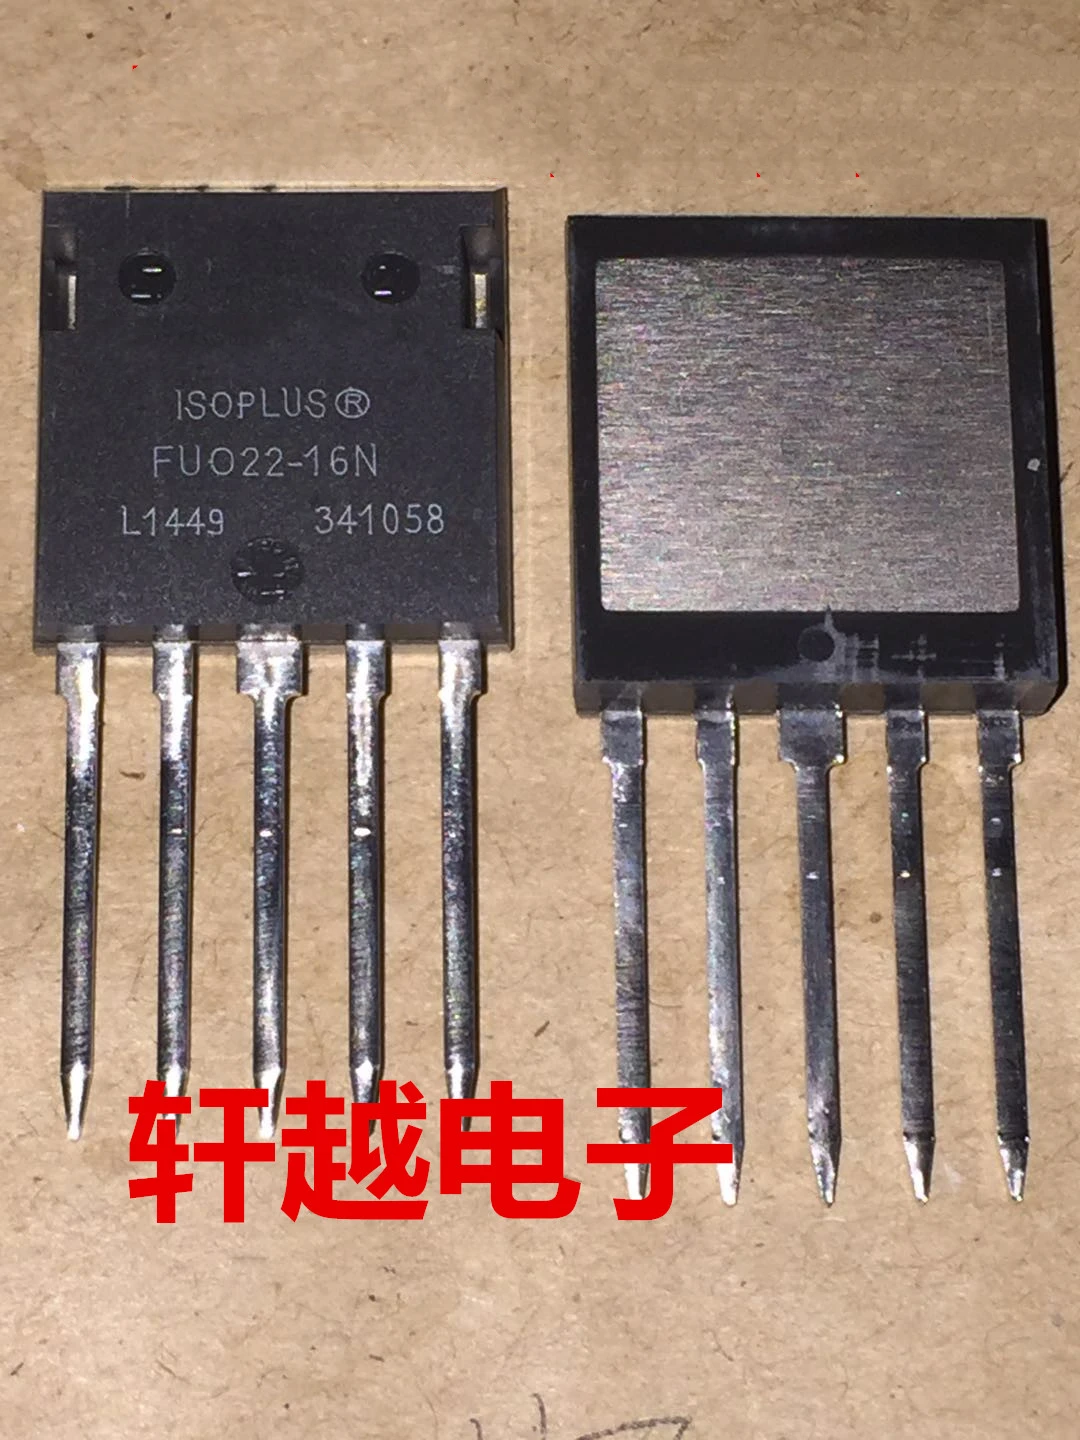 

100% nuevo 2 pcs/lote FUO22-16N TO-3P Transistor original 1600V30A Diode Type Three Phase